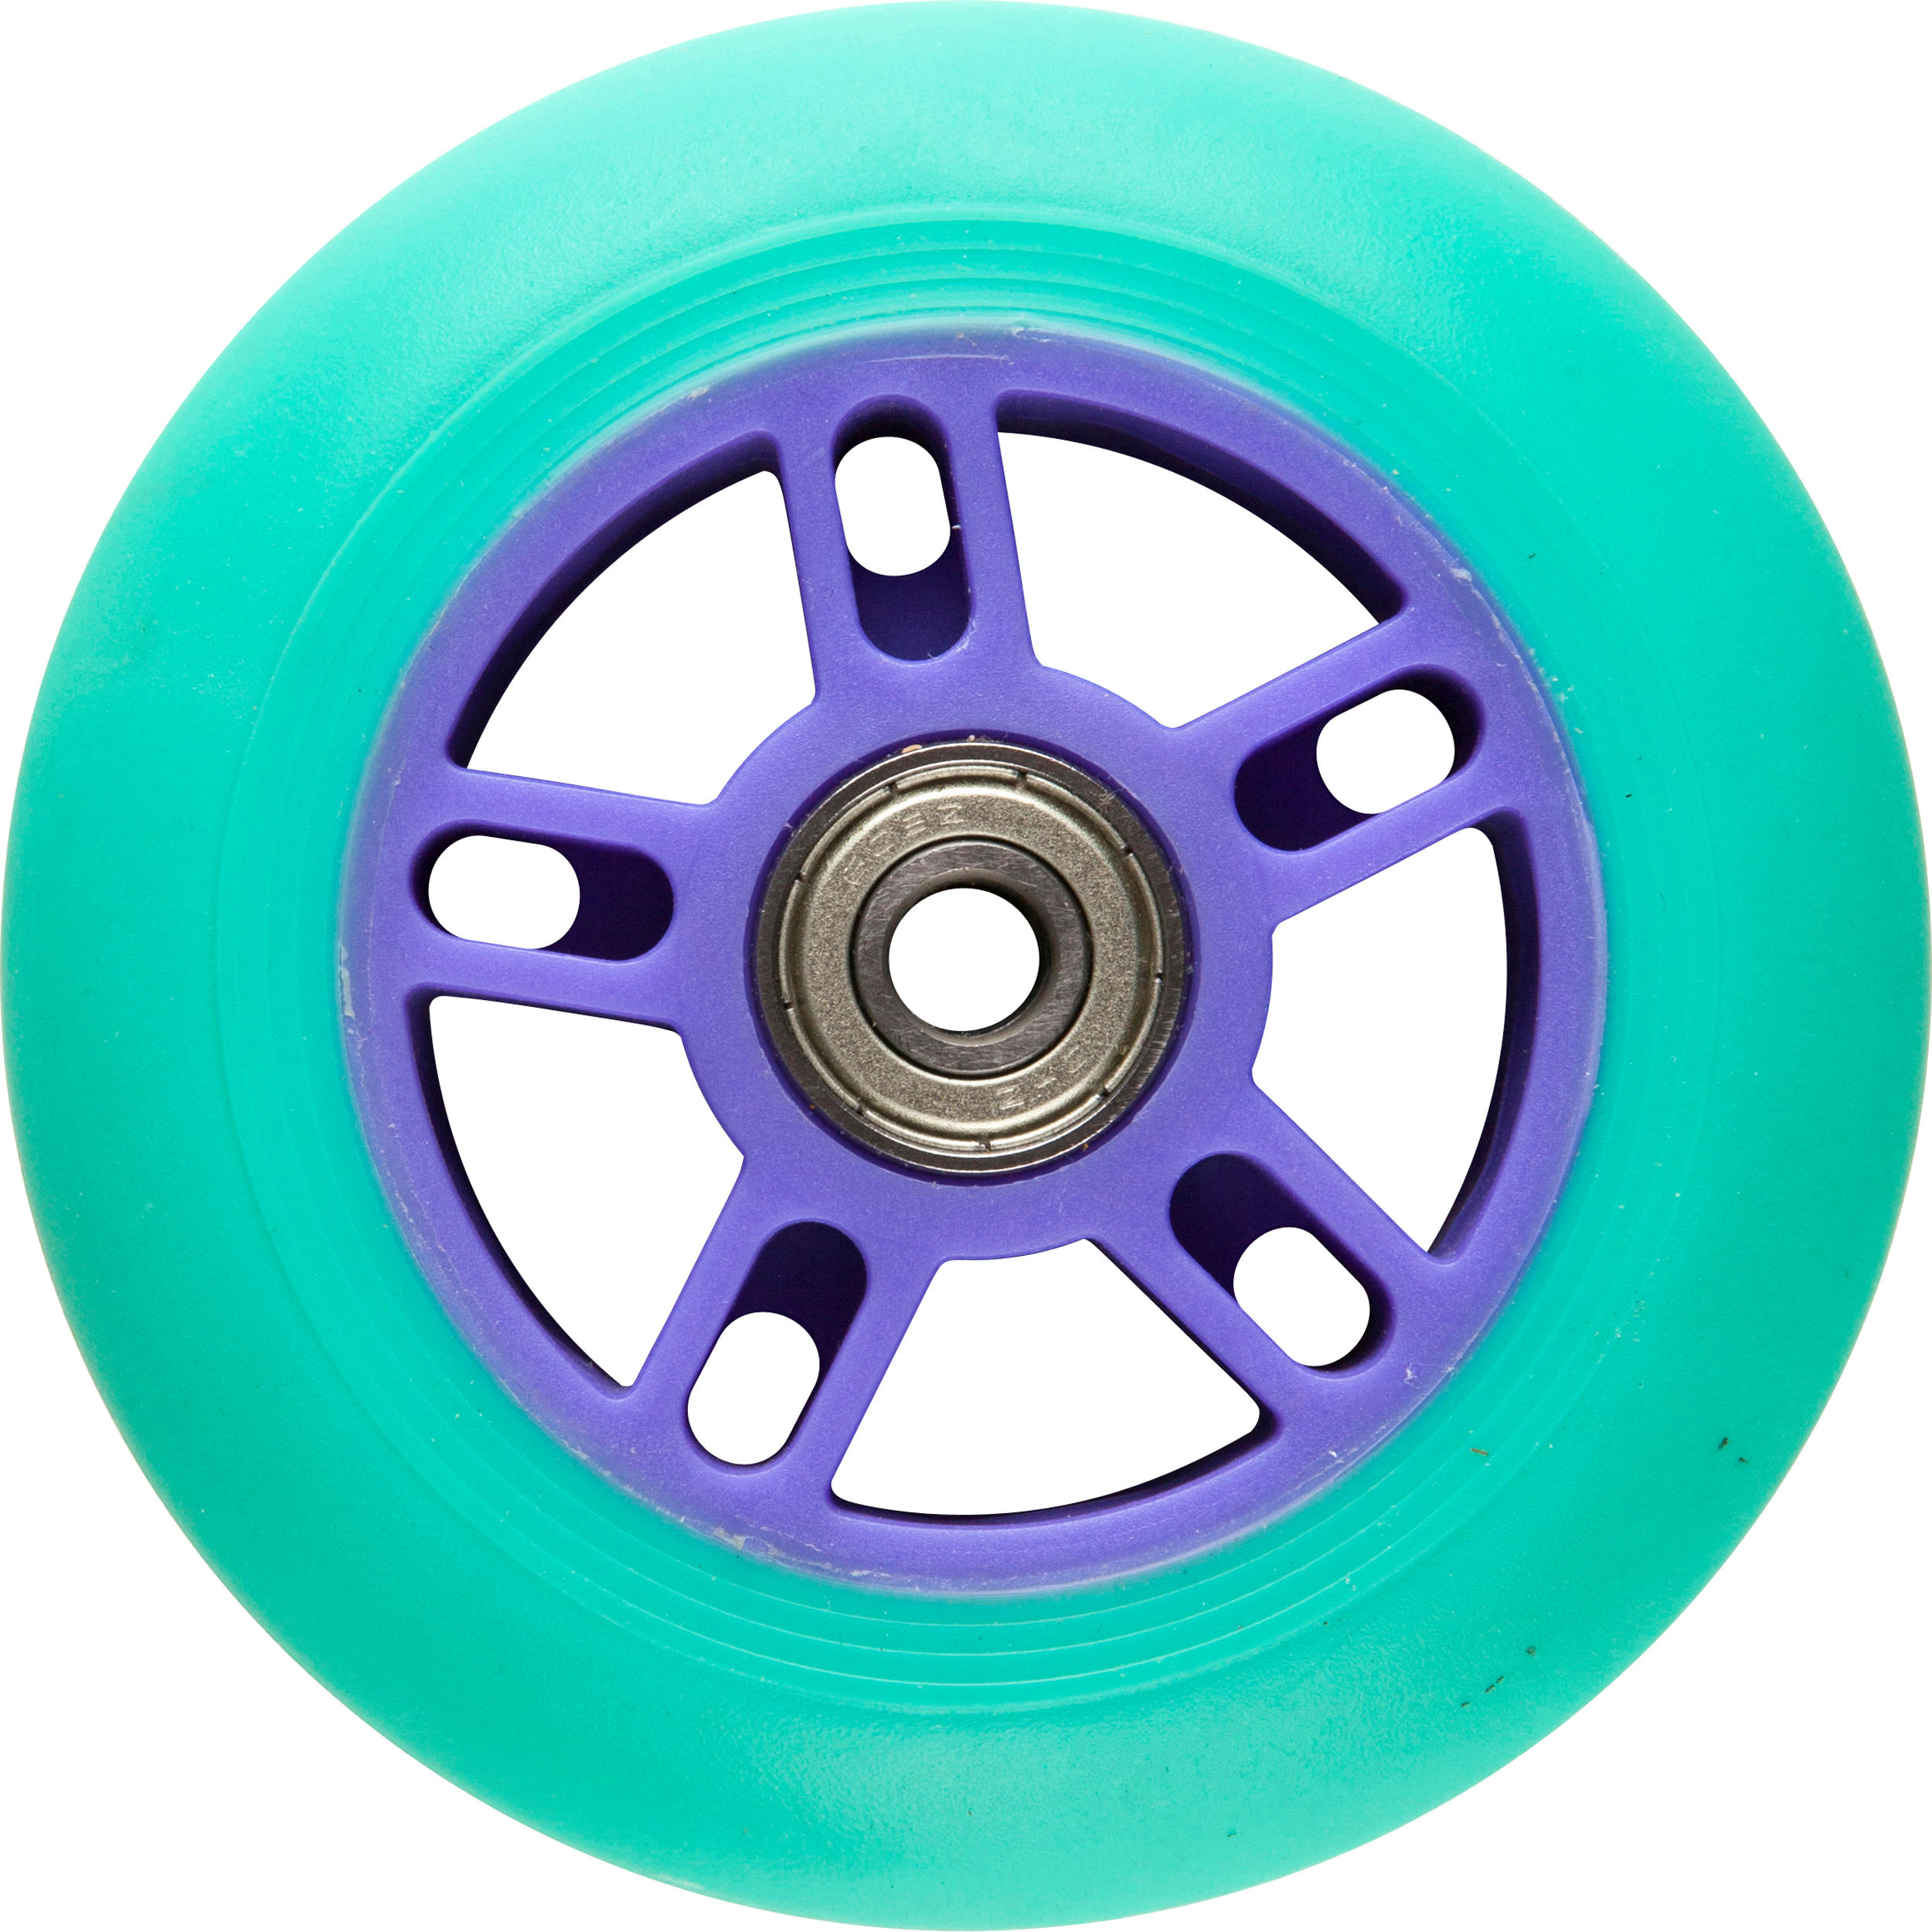 1 x 100 mm Scooter Wheel with Bearings - Green 1/5